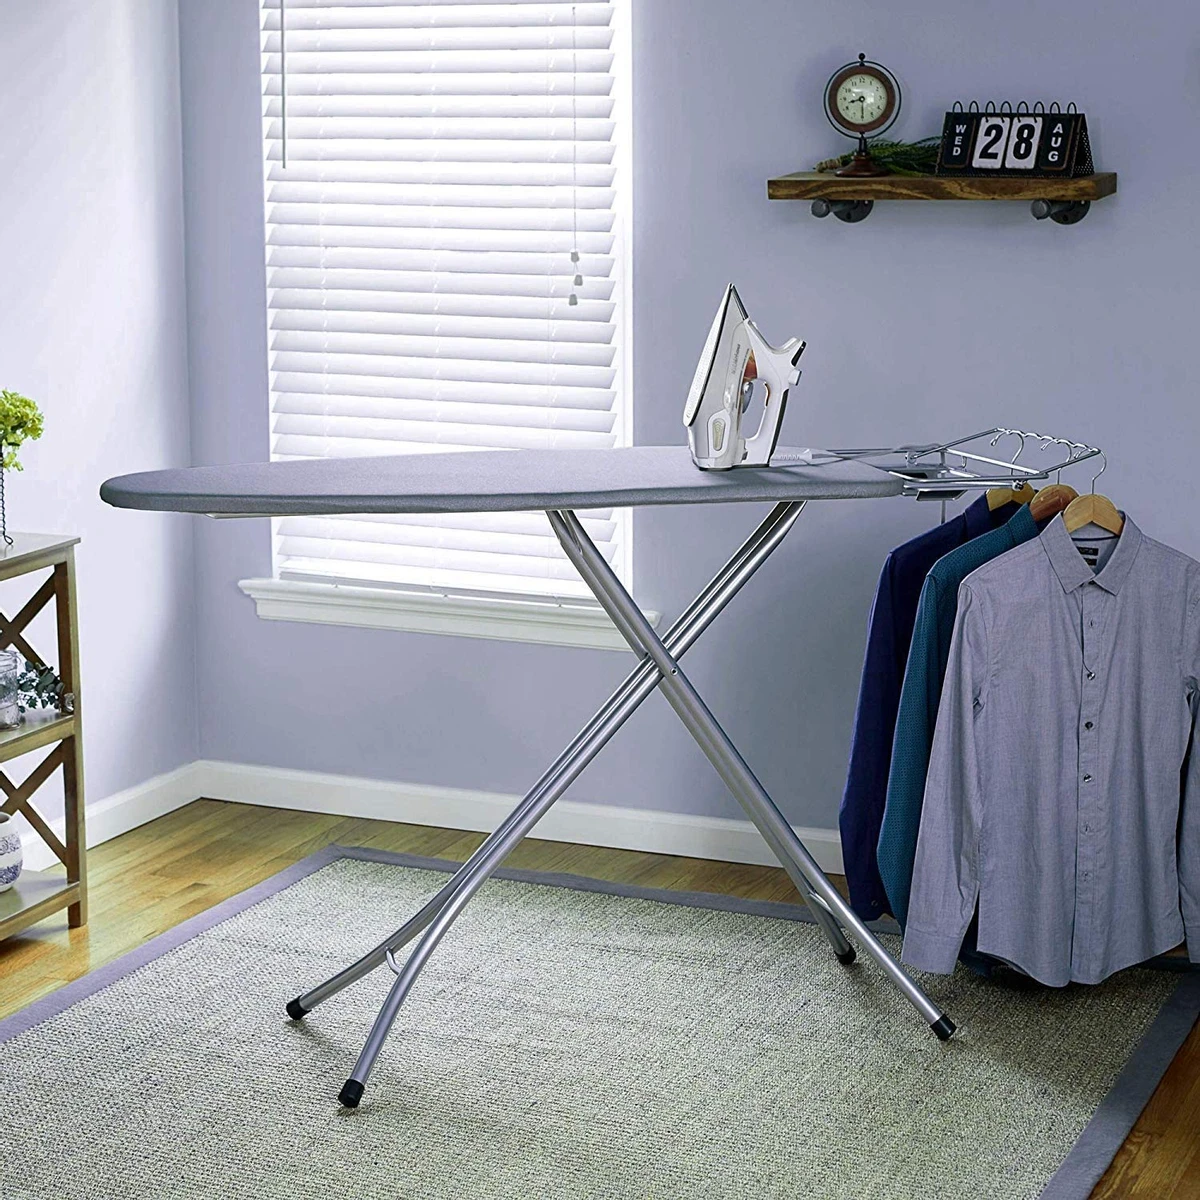 Folding Iron Table 14.42 Inches - Multi color